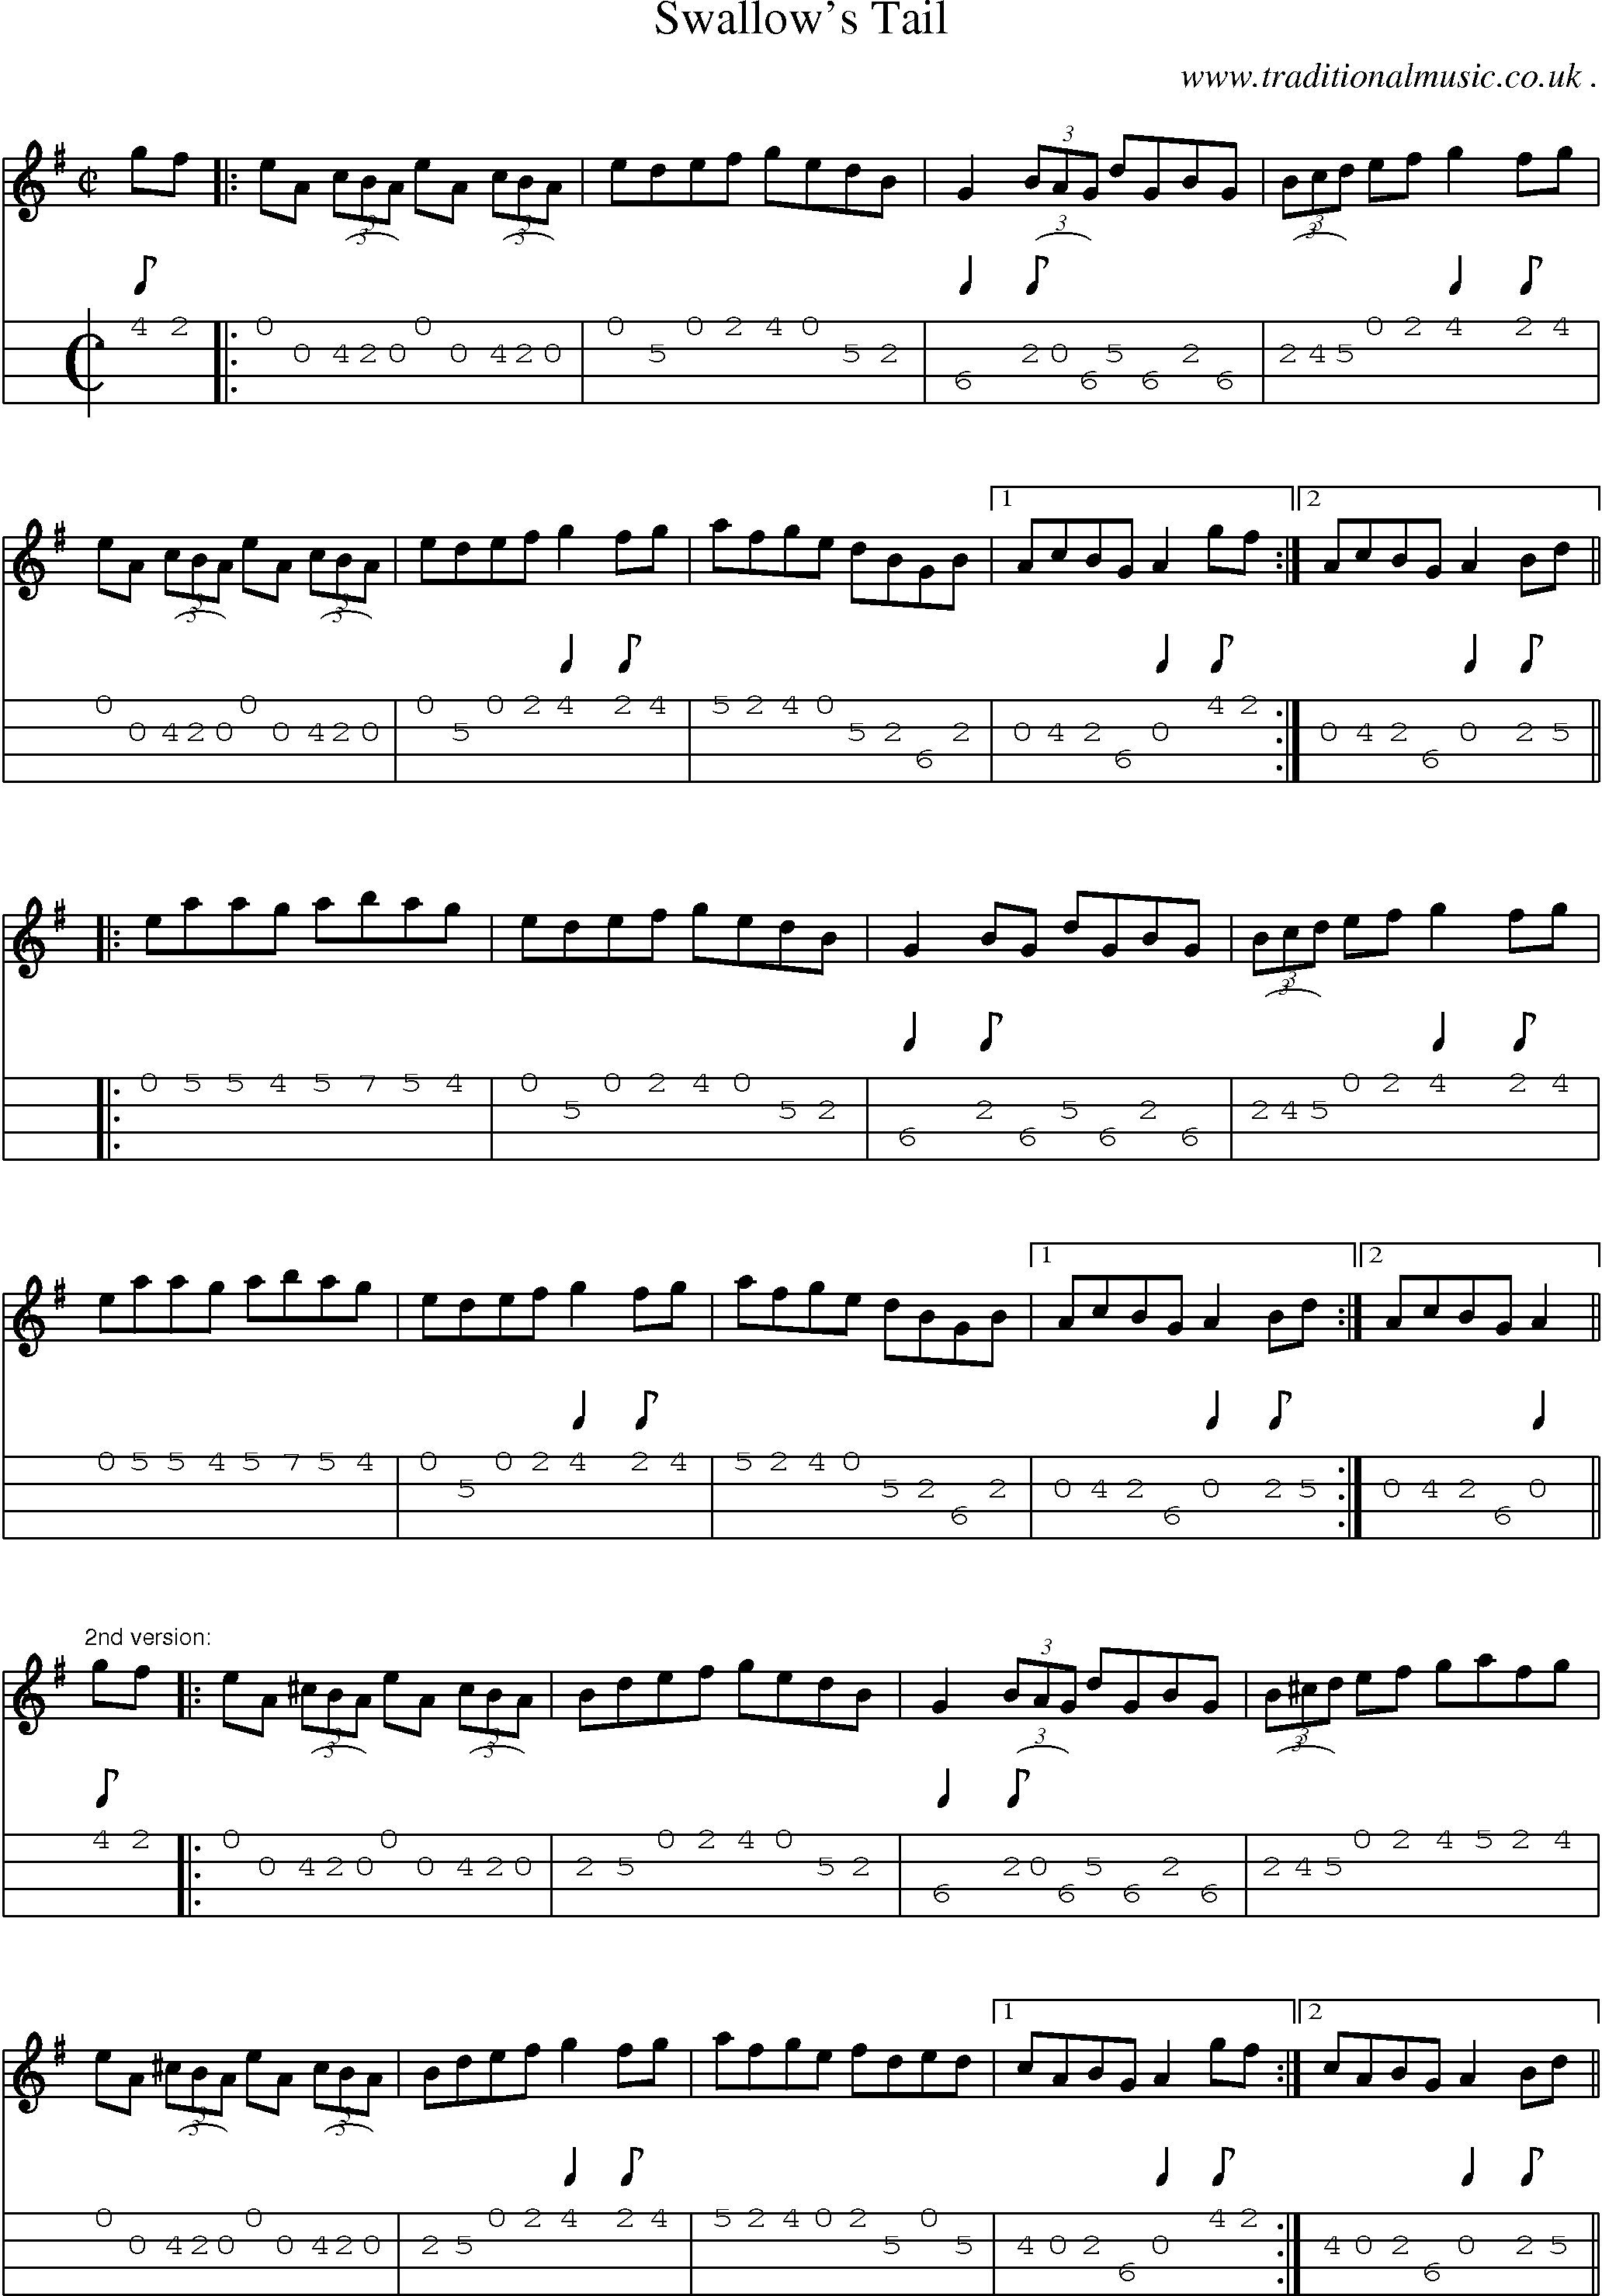 Sheet-Music and Mandolin Tabs for Swallows Tail